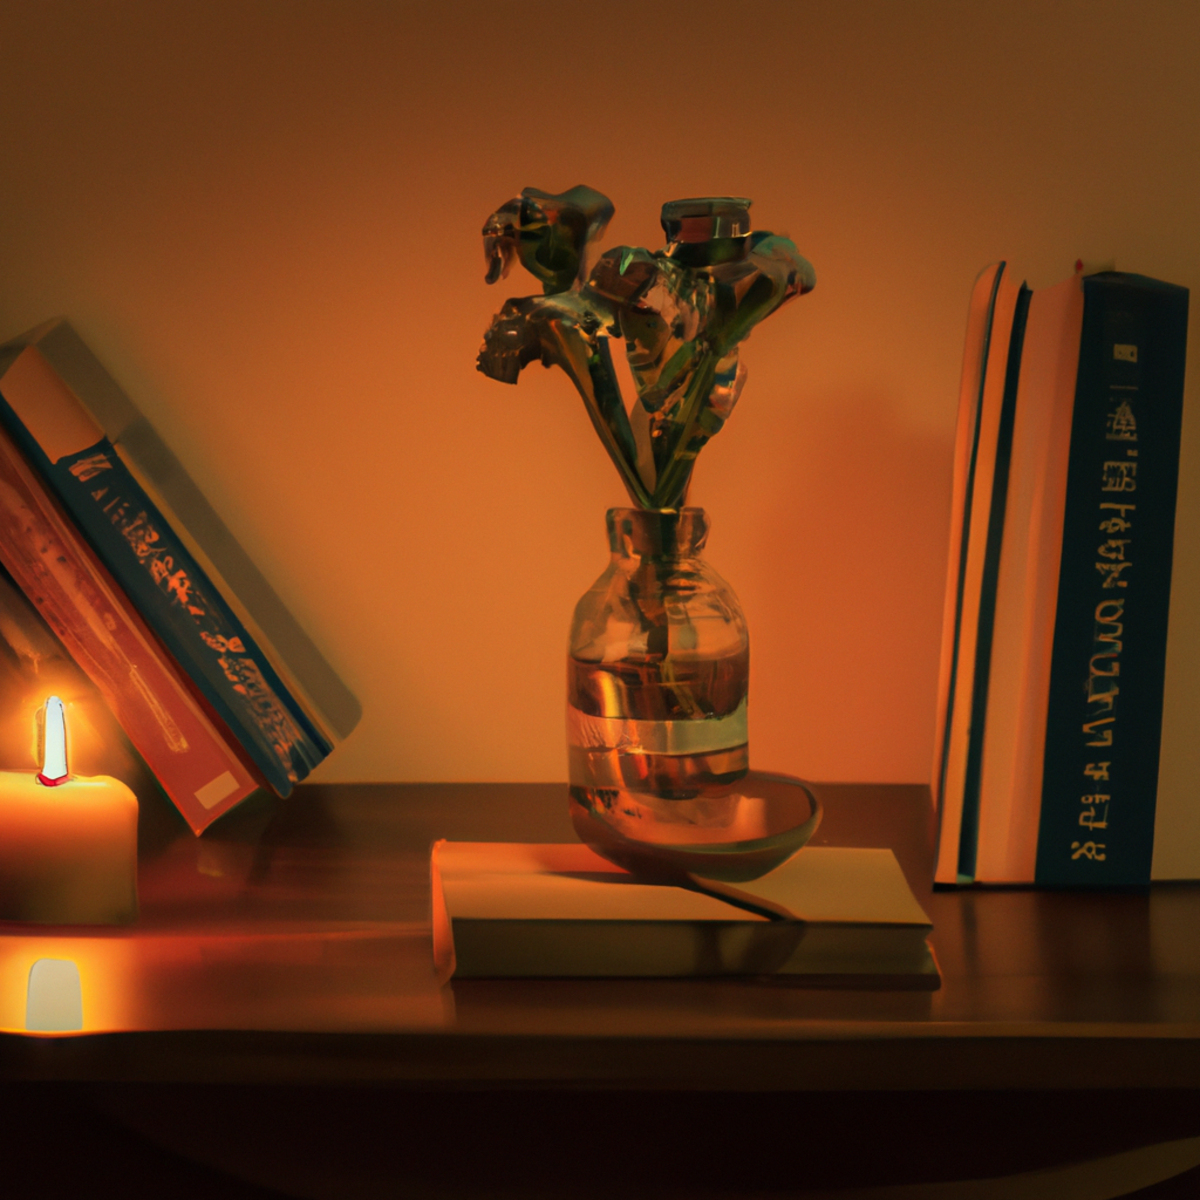 The photo shows a wooden table with a small vase of flowers in the center. On one side of the vase, there is a stack of books with a bookmark sticking out of the top one. On the other side, there is a candle in a glass jar, with a lit flame casting a warm glow on the table. In the background, there is a window with sunlight streaming in, creating a peaceful and calming atmosphere. The objects on the table suggest a serene and focused environment, perfect for practicing meditation exercises to clear the mind and improve memory.